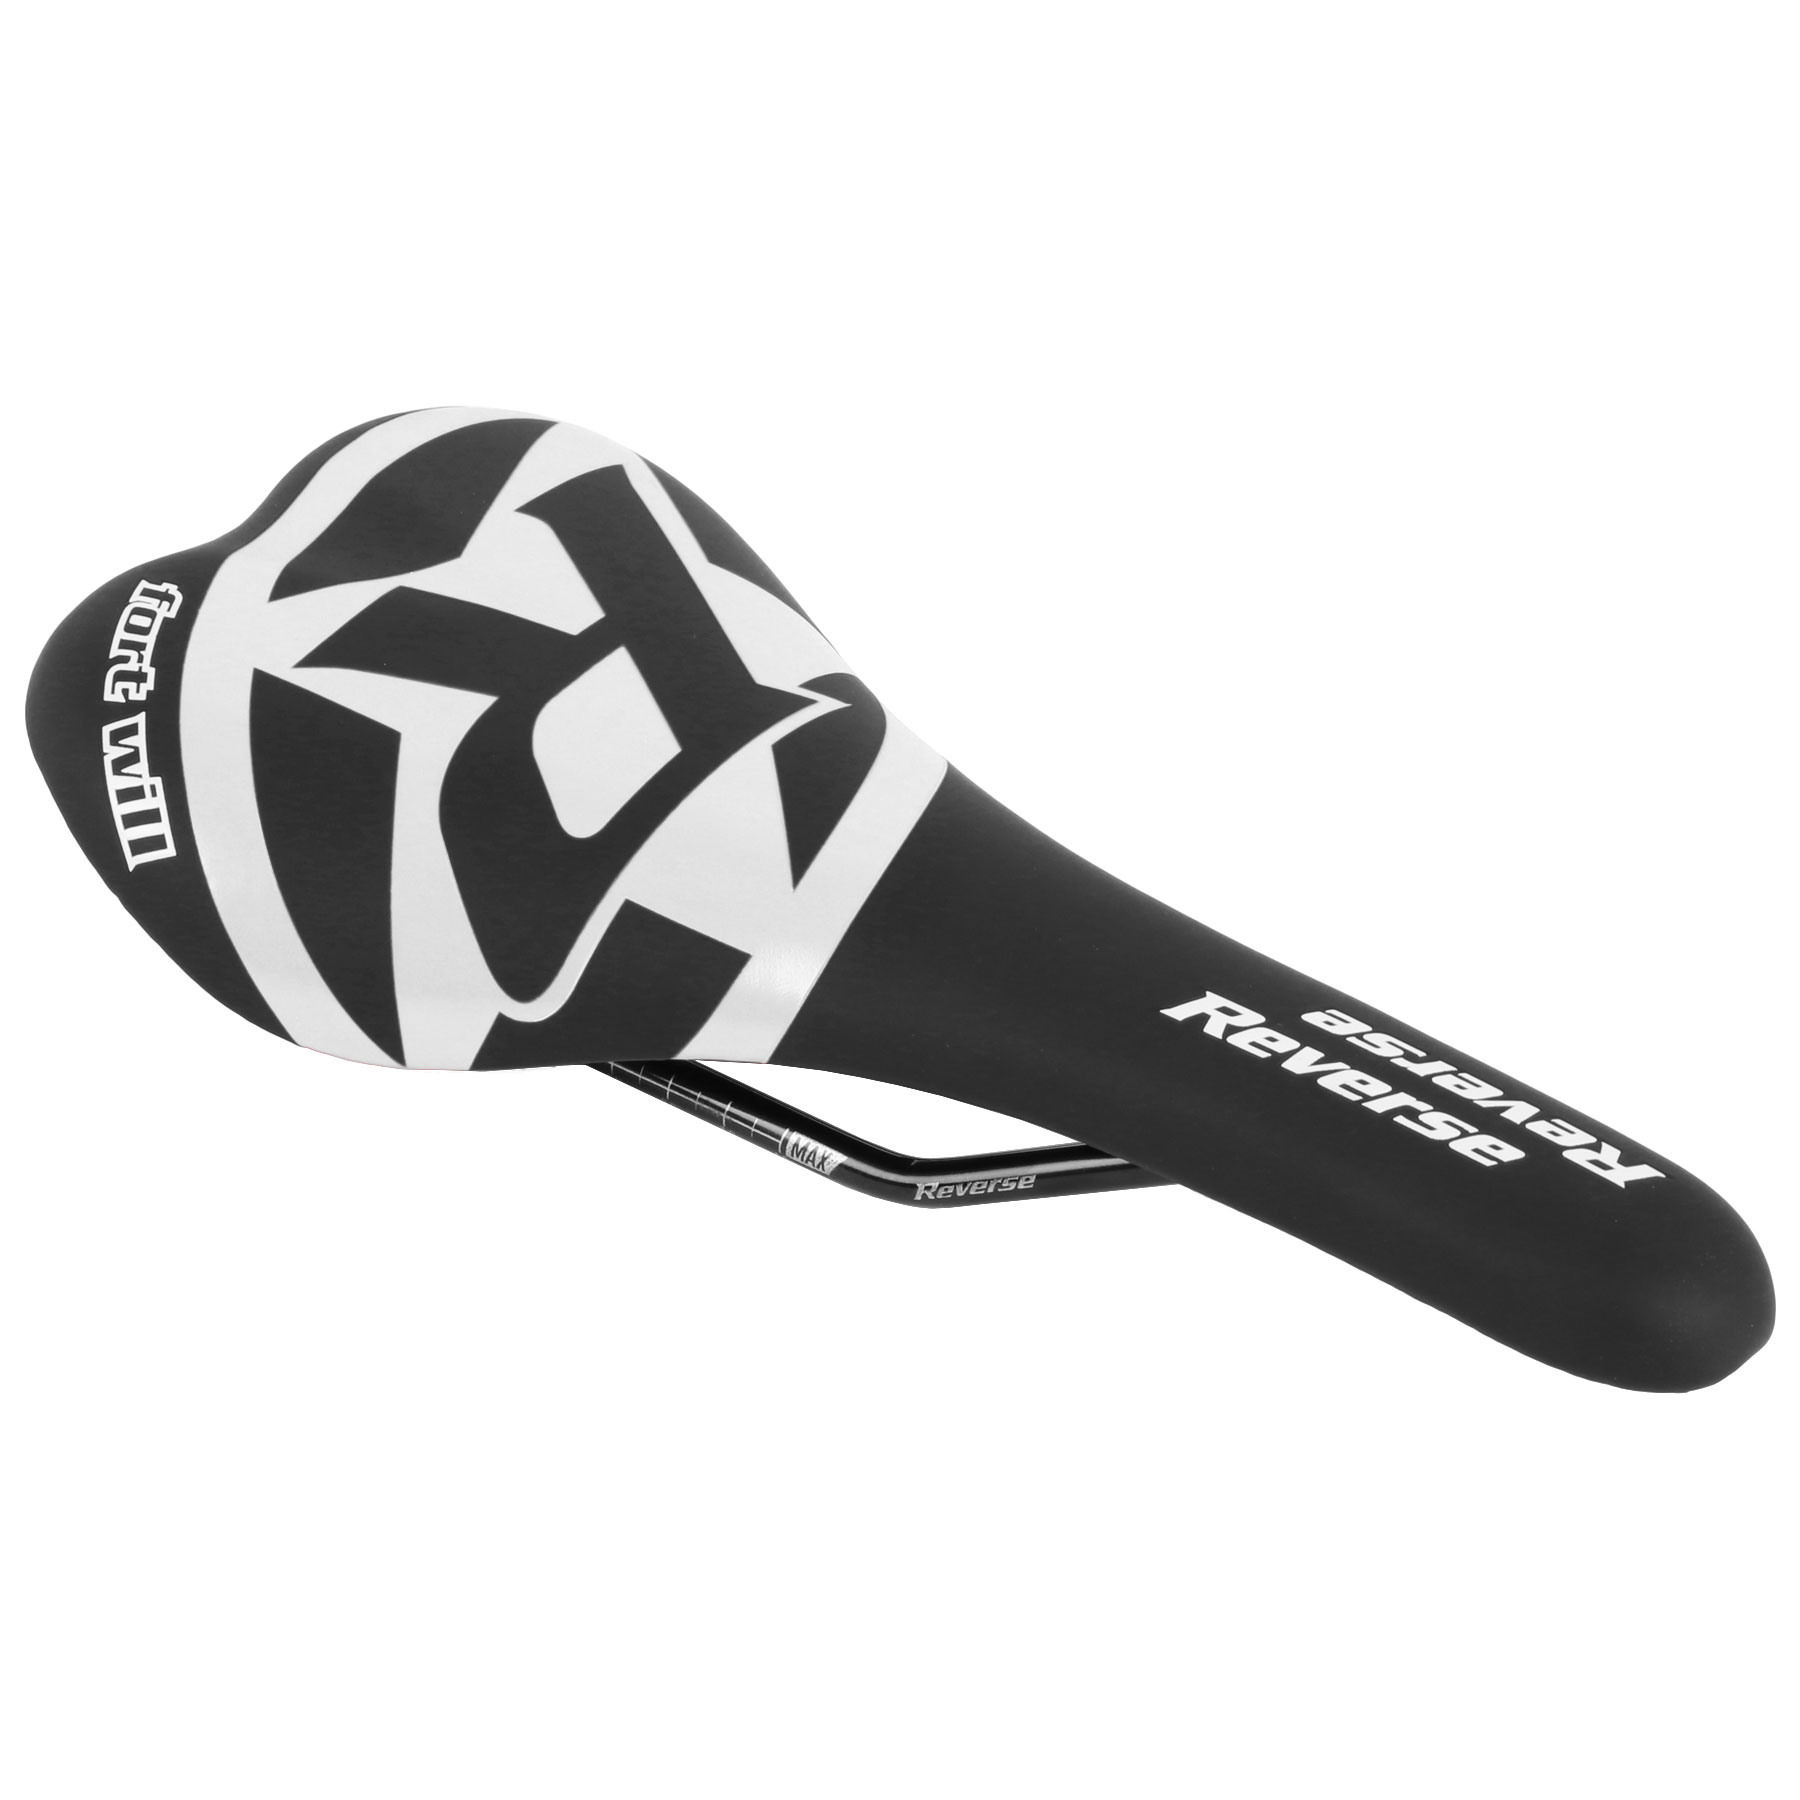 Productfoto van Reverse Components Fort Will Saddle CrMo Style - black / white